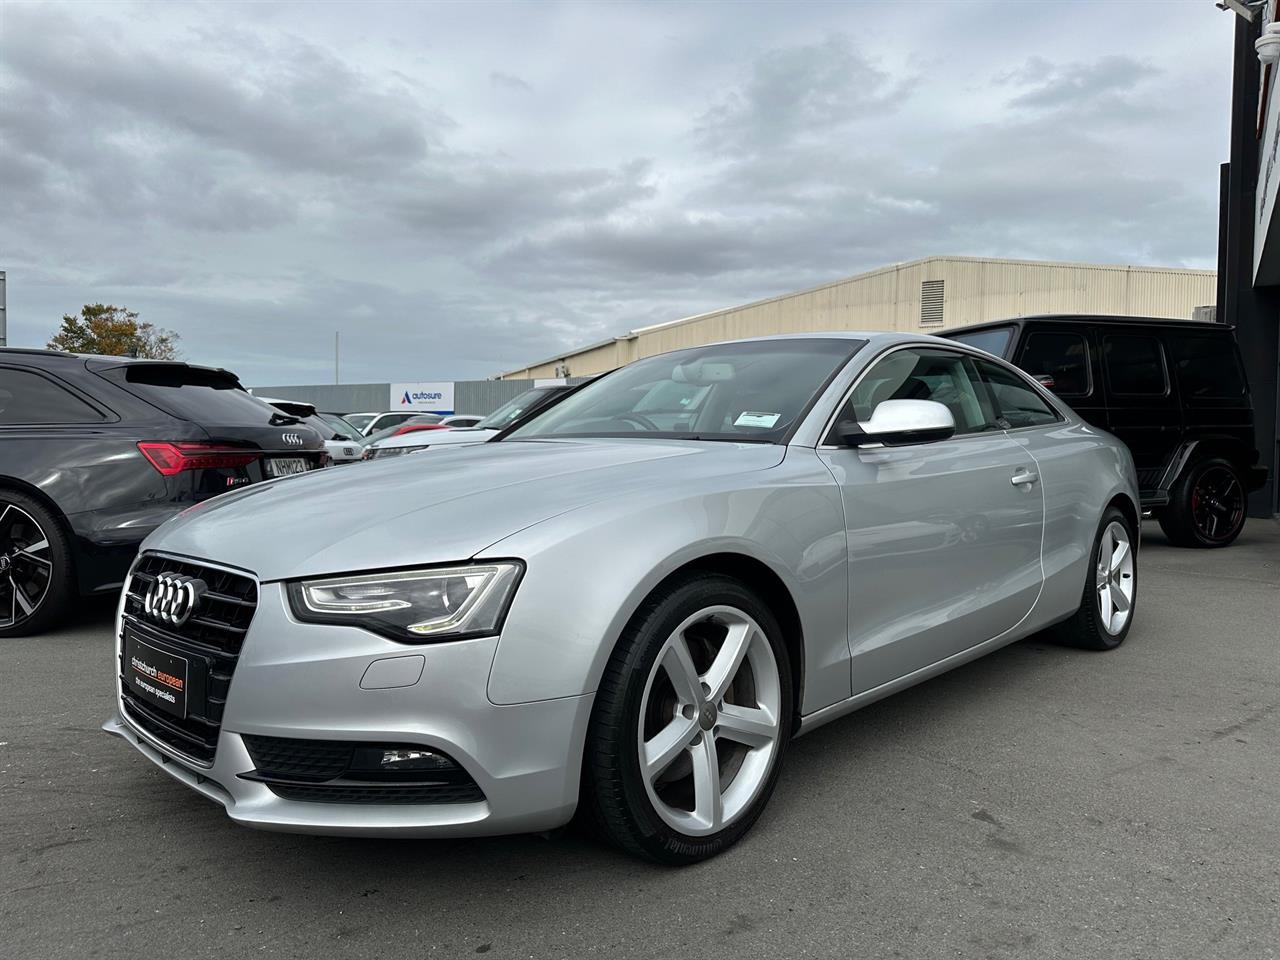 image-2, 2012 Audi A5 2.0 TFSI Quattro Facelift Coupe at Christchurch